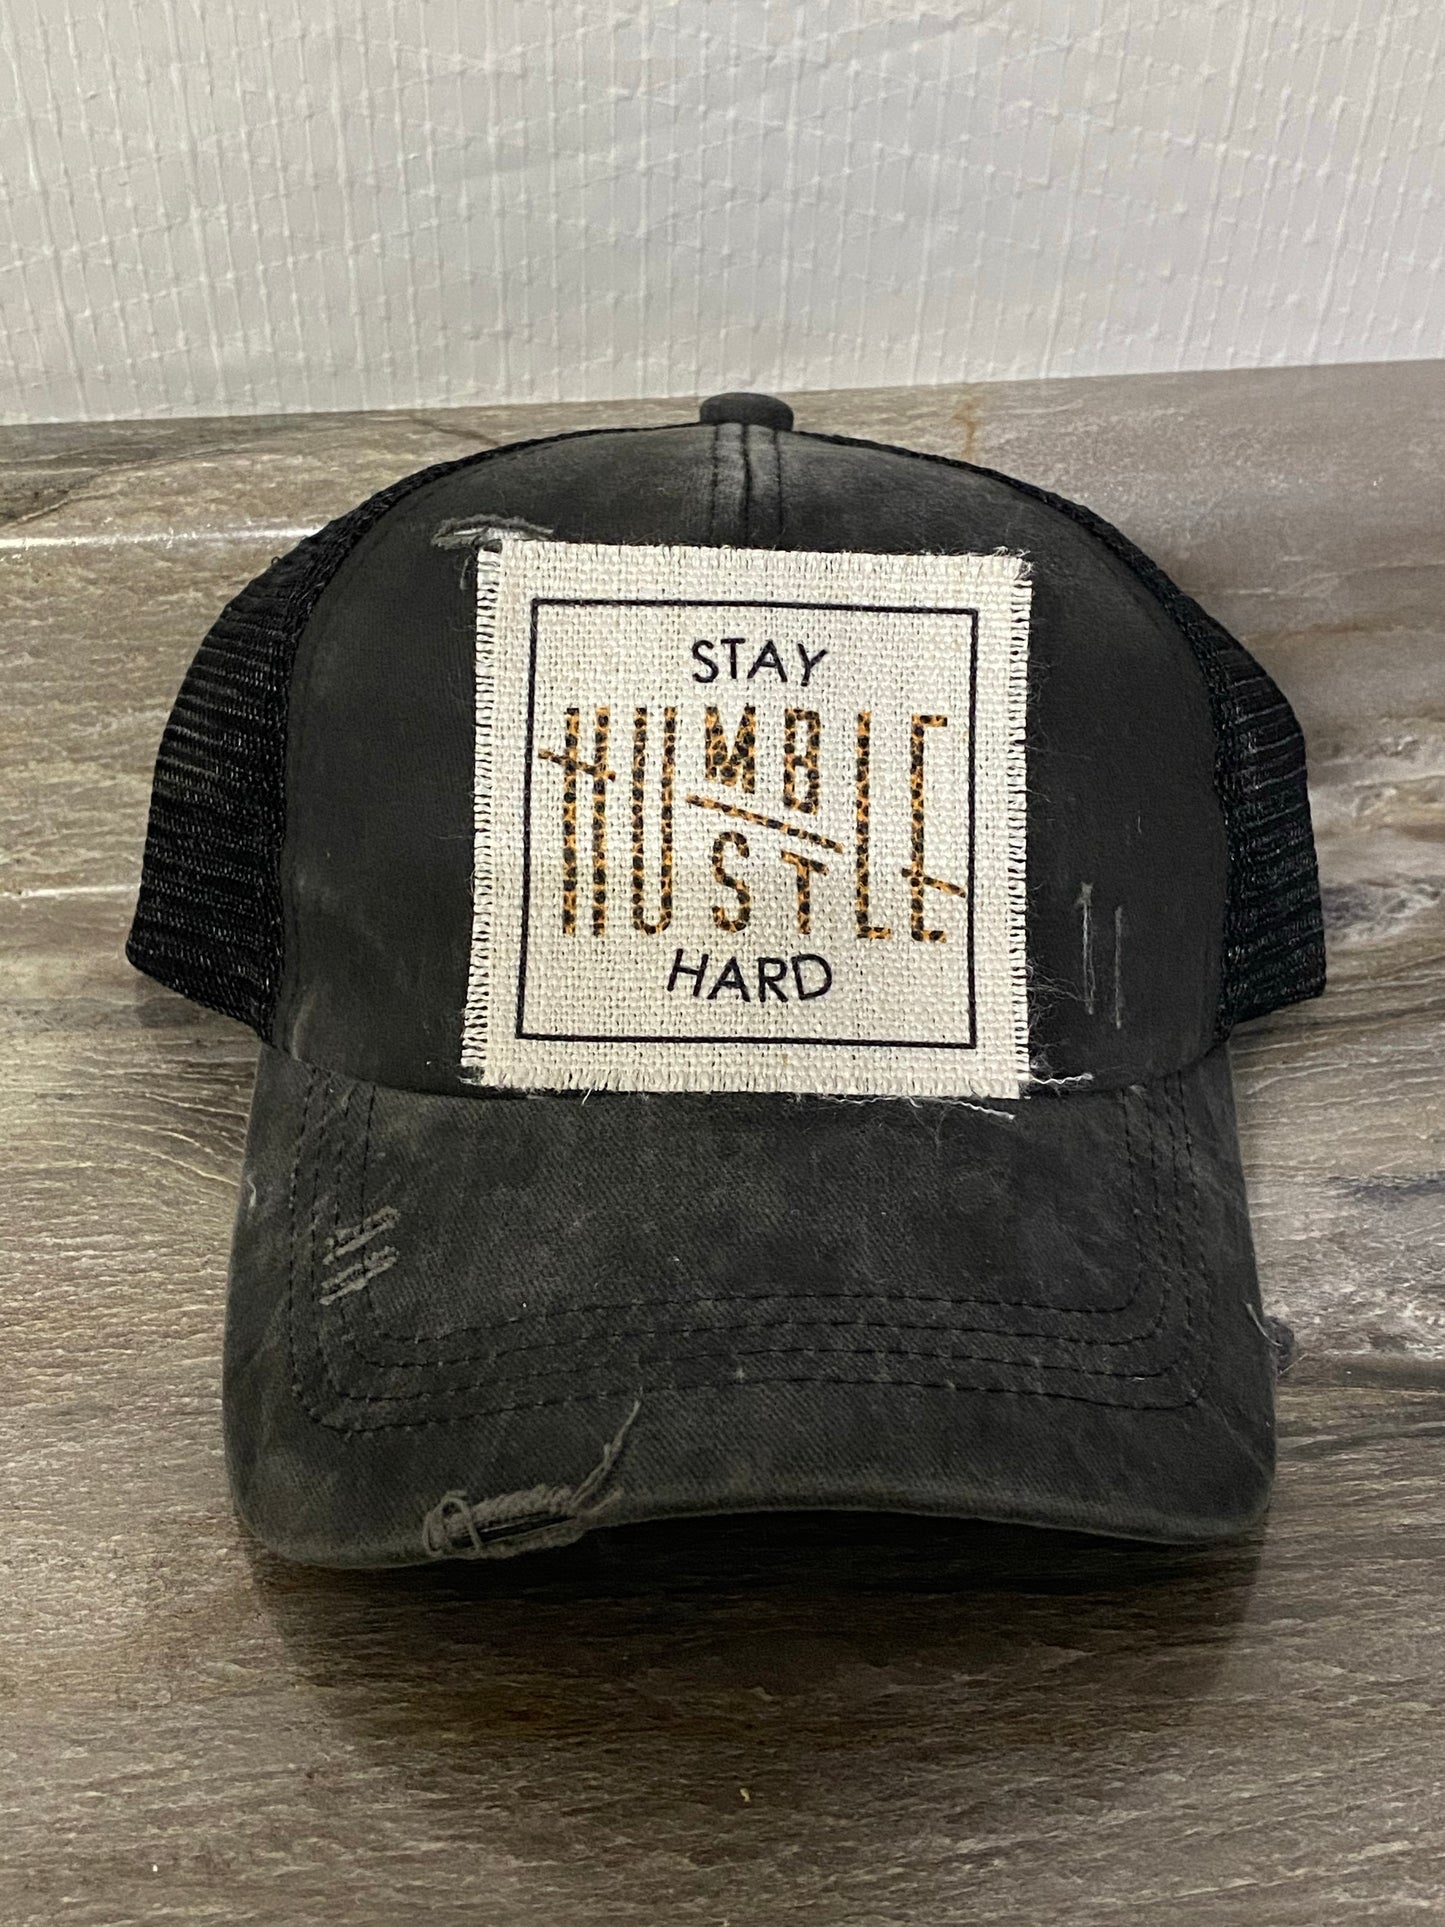 Stay Humble Hustle Hard Hat Patch